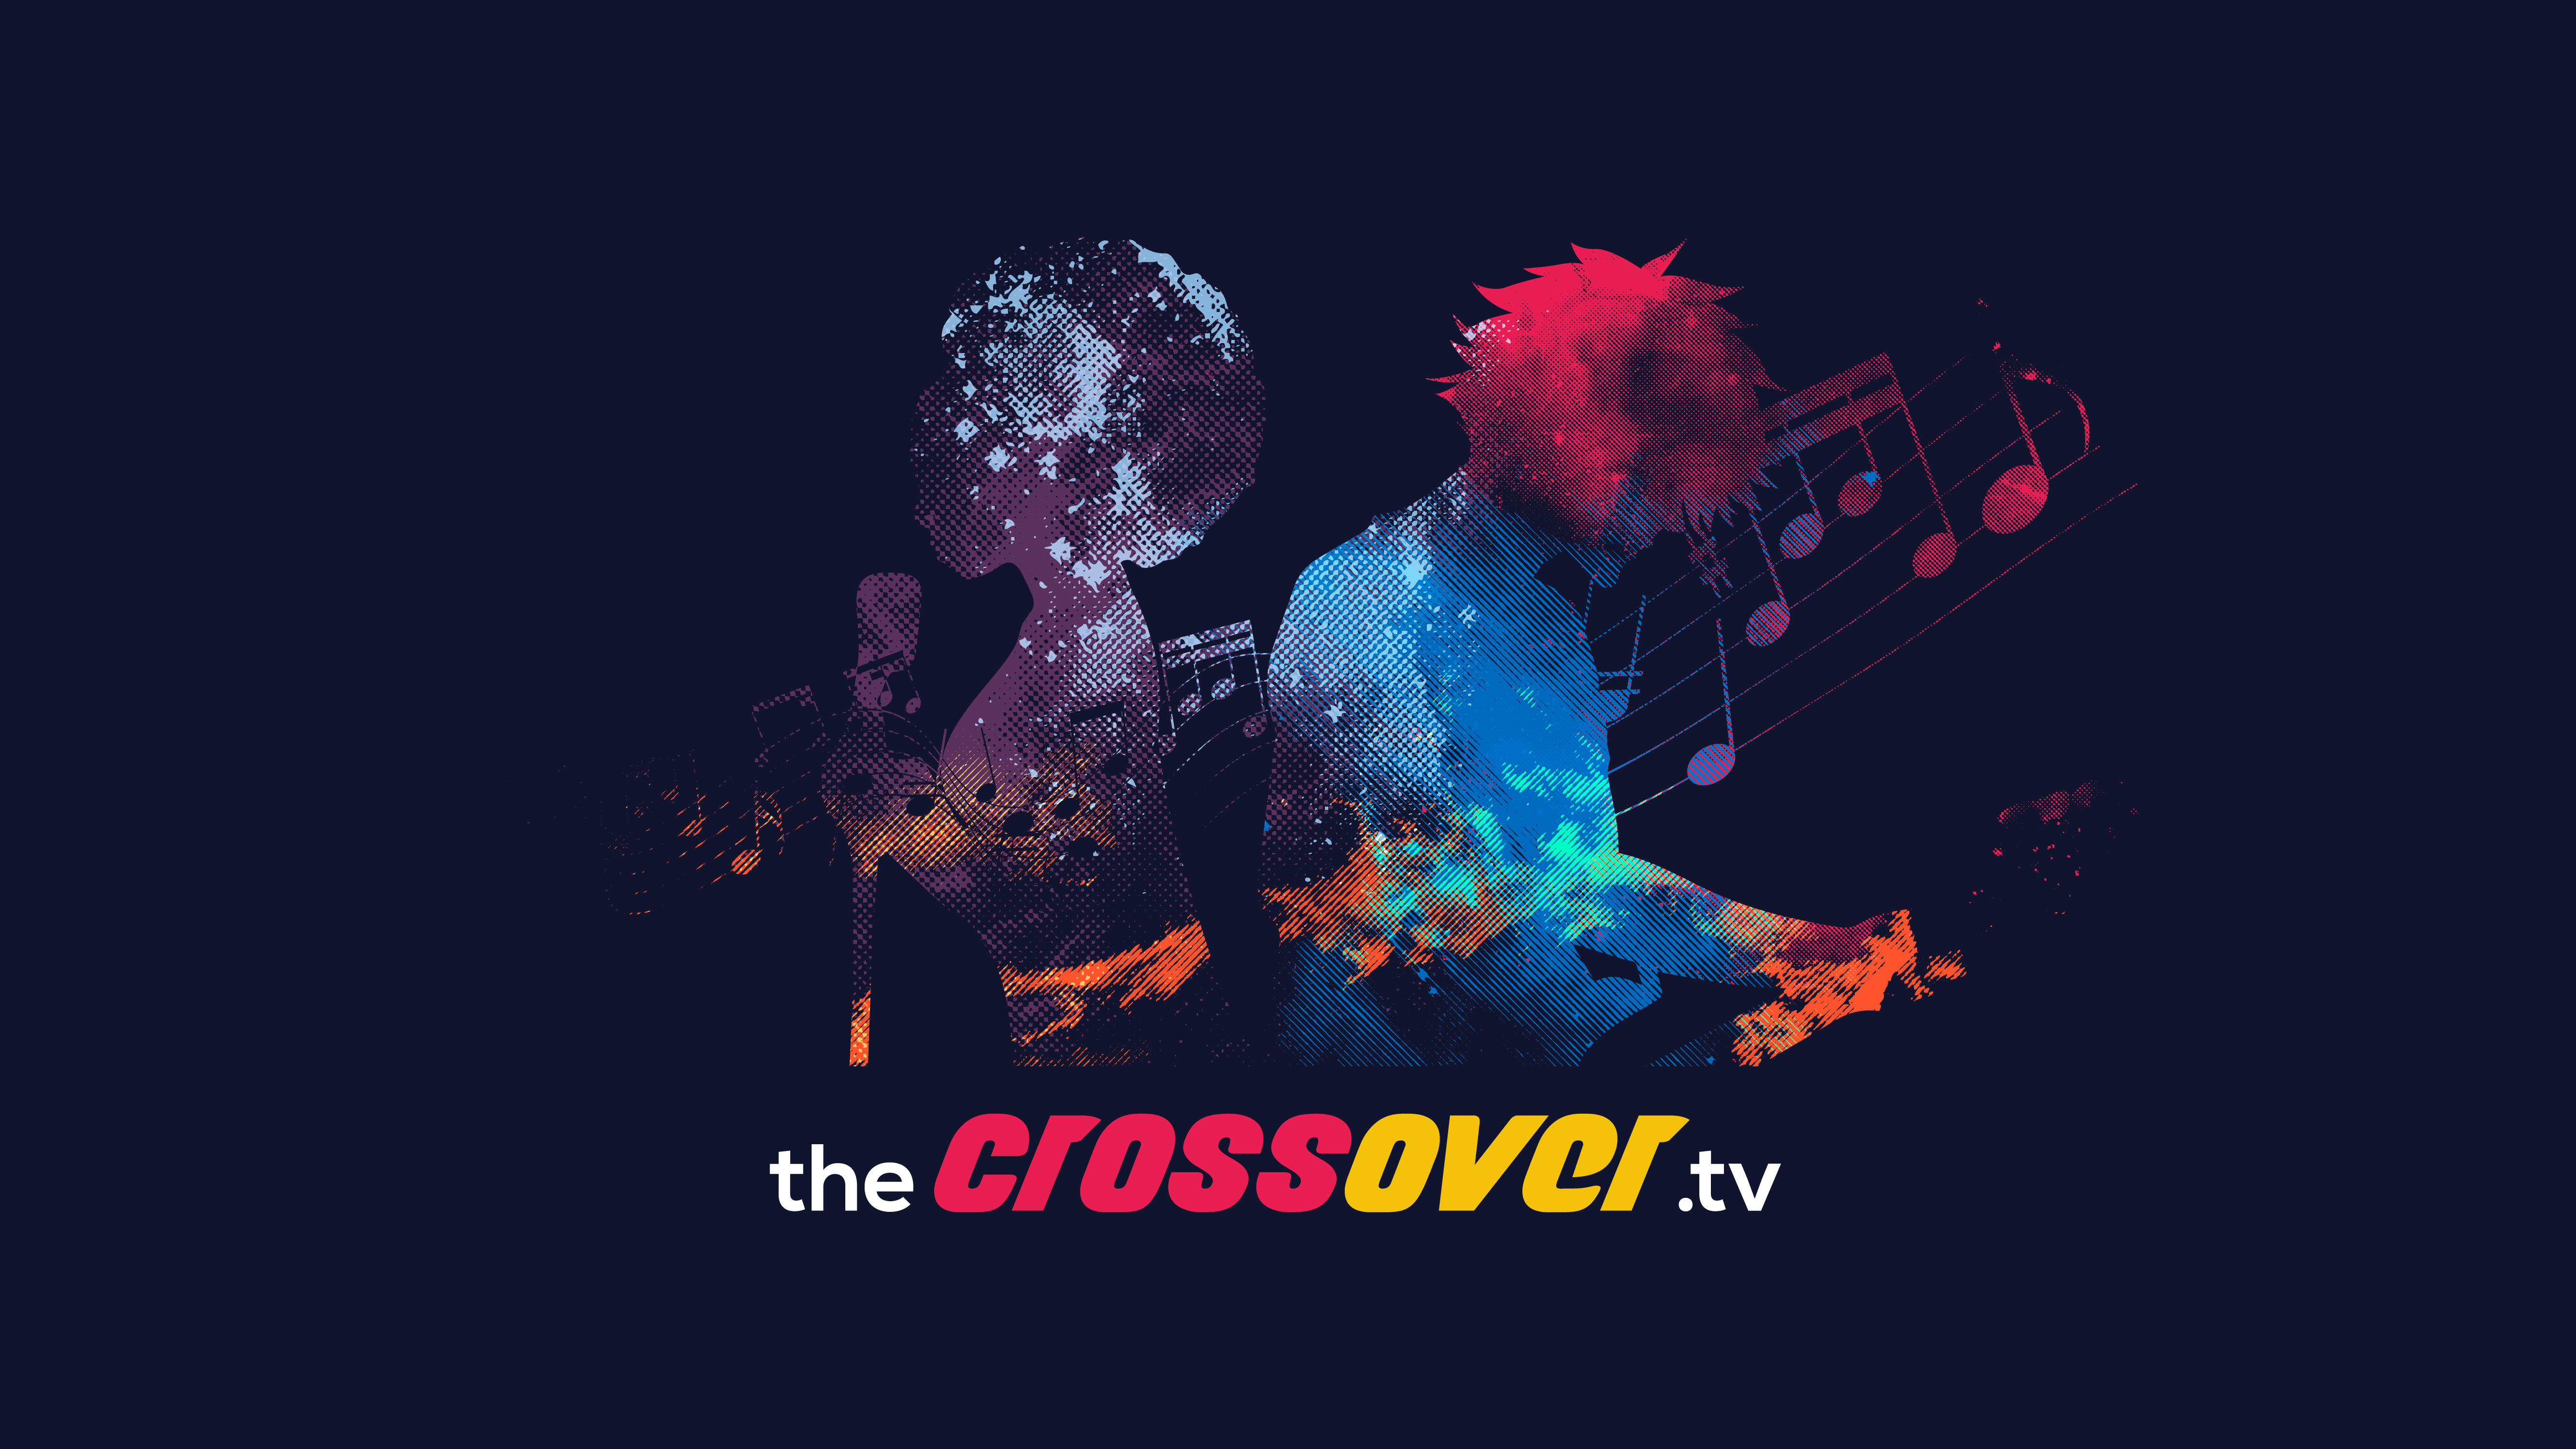 thecrossover.tv